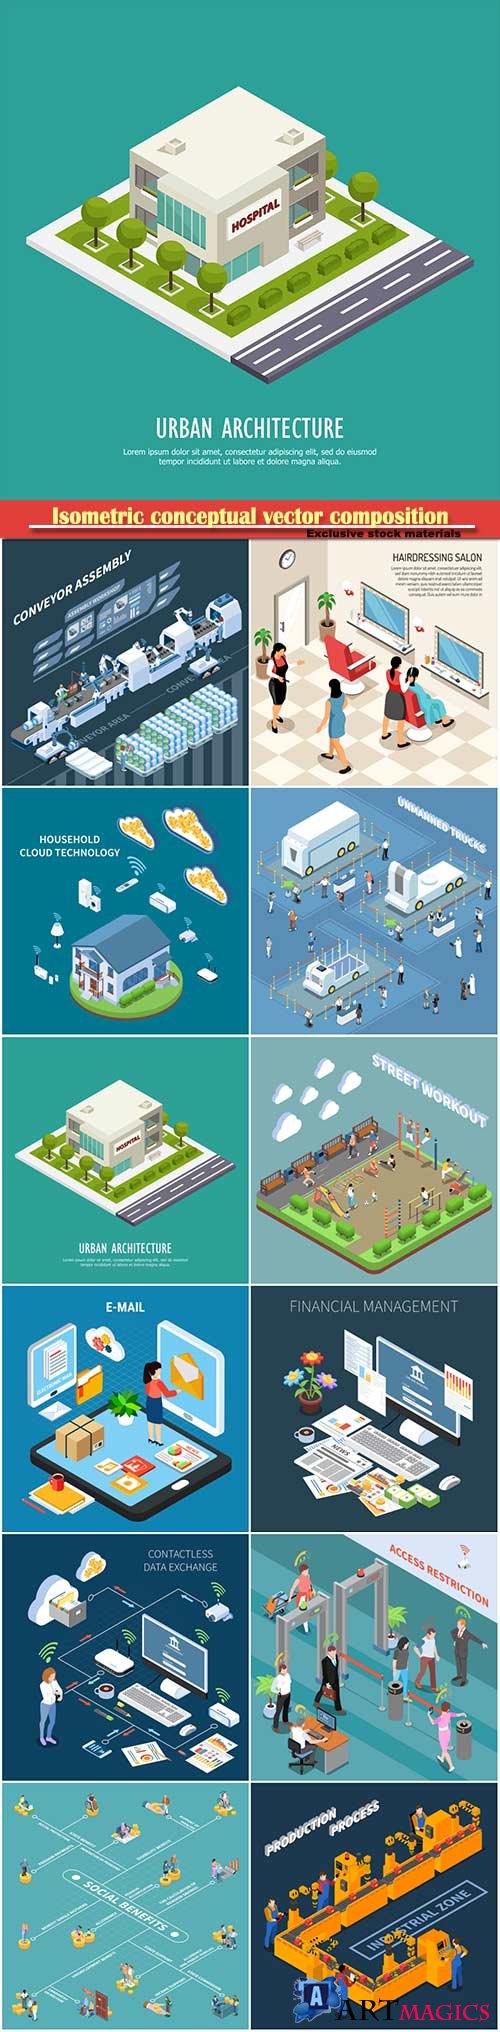 Isometric conceptual vector composition, infographics template # 75